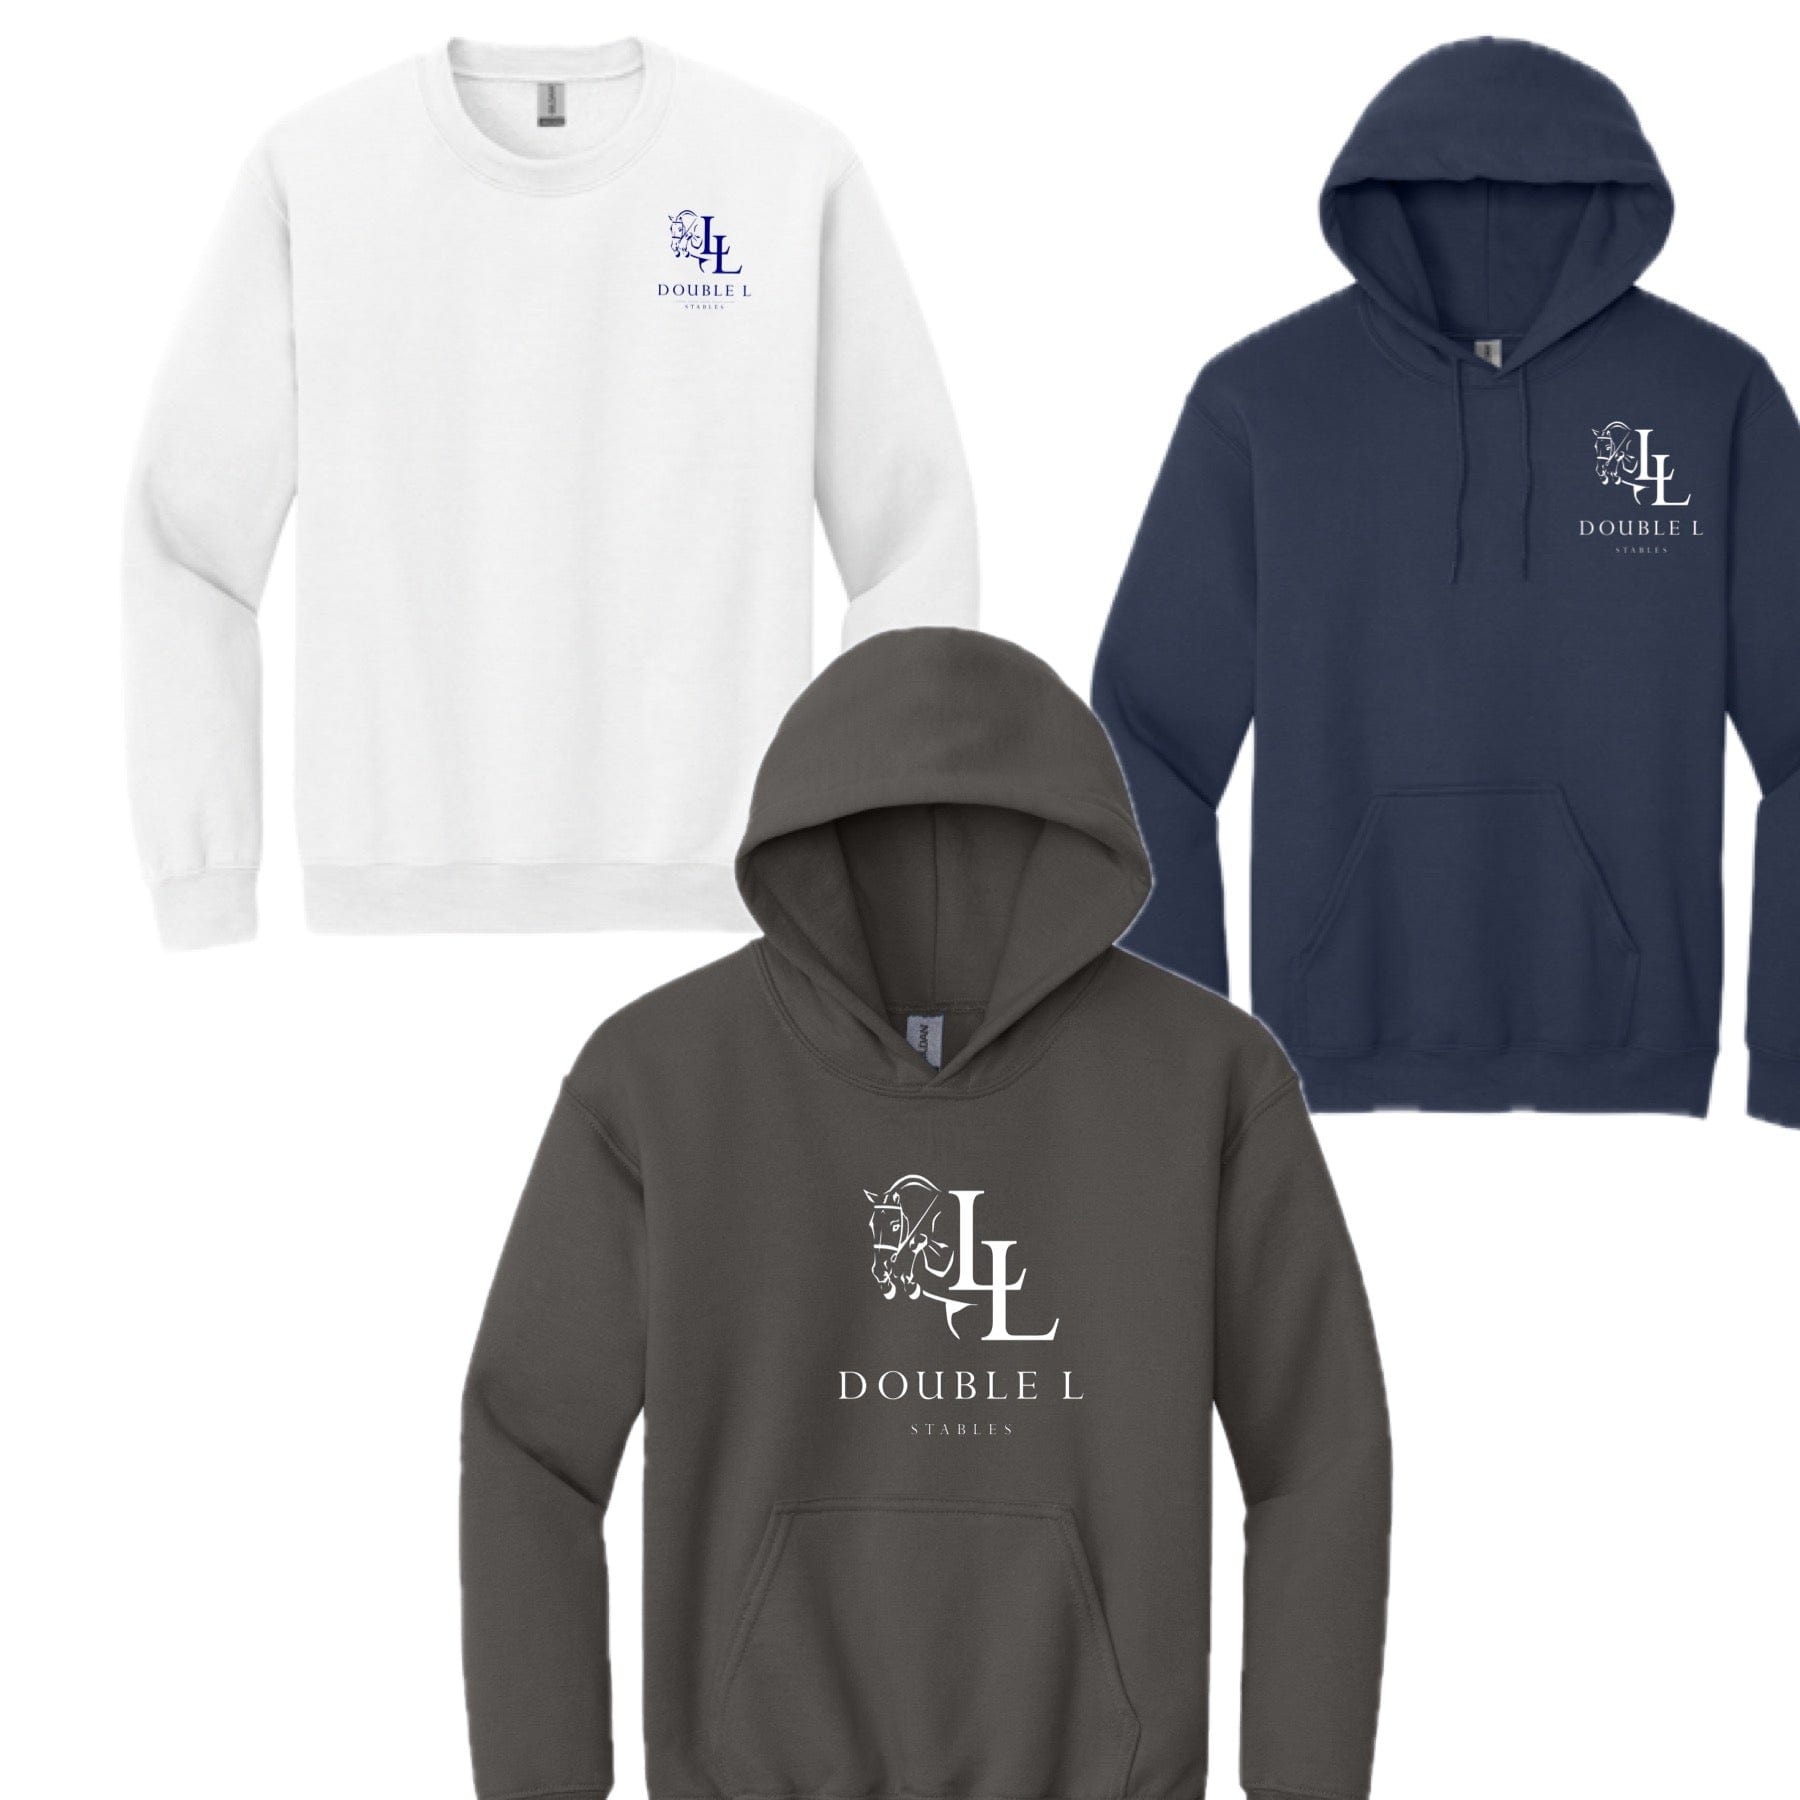 Equestrian Team Apparel Double L Stables Youth Sweatshirt equestrian team apparel online tack store mobile tack store custom farm apparel custom show stable clothing equestrian lifestyle horse show clothing riding clothes horses equestrian tack store